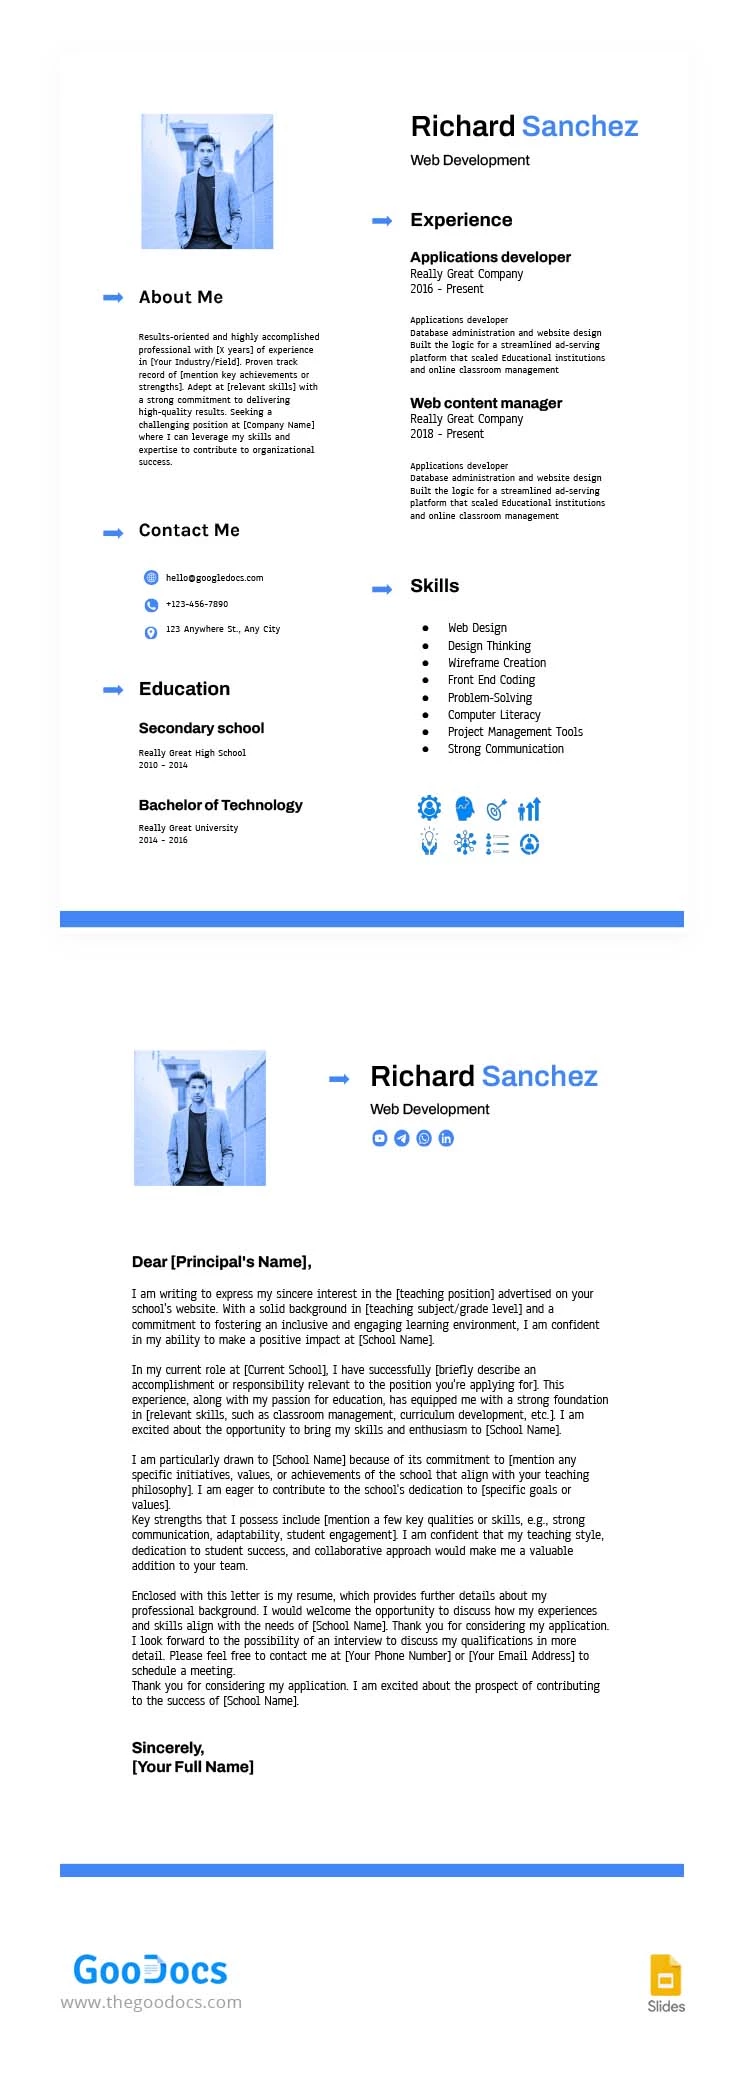 Professional Resume Cover Letter - free Google Docs Template - 10068092